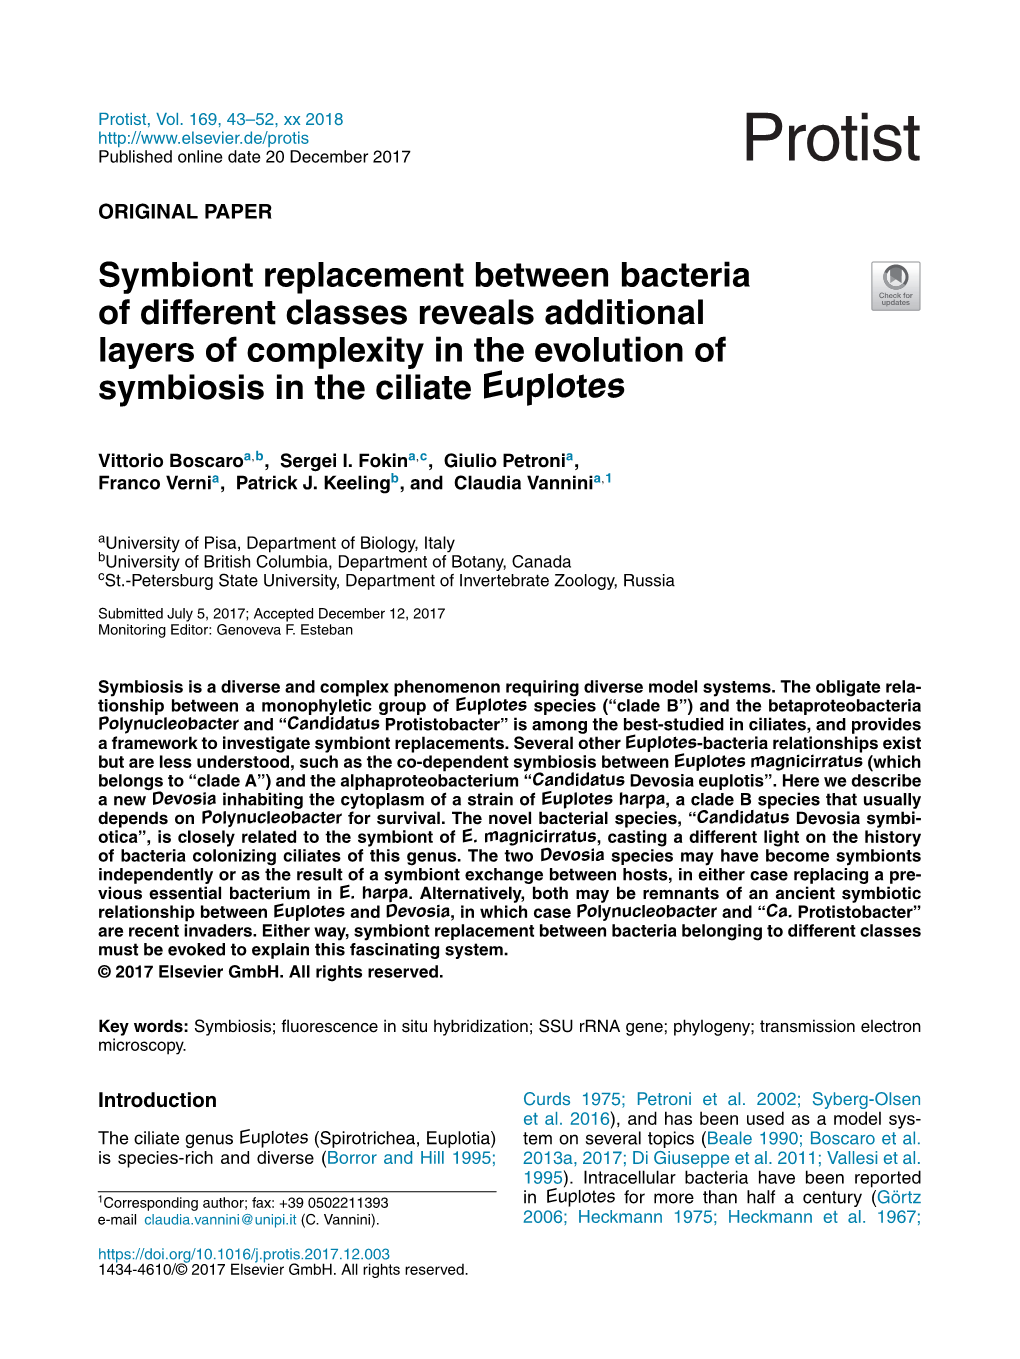 Symbiont Replacement Between Bacteria of Different Classes Reveals Additional Layers of Complexity in the Evolution of Symbiosis